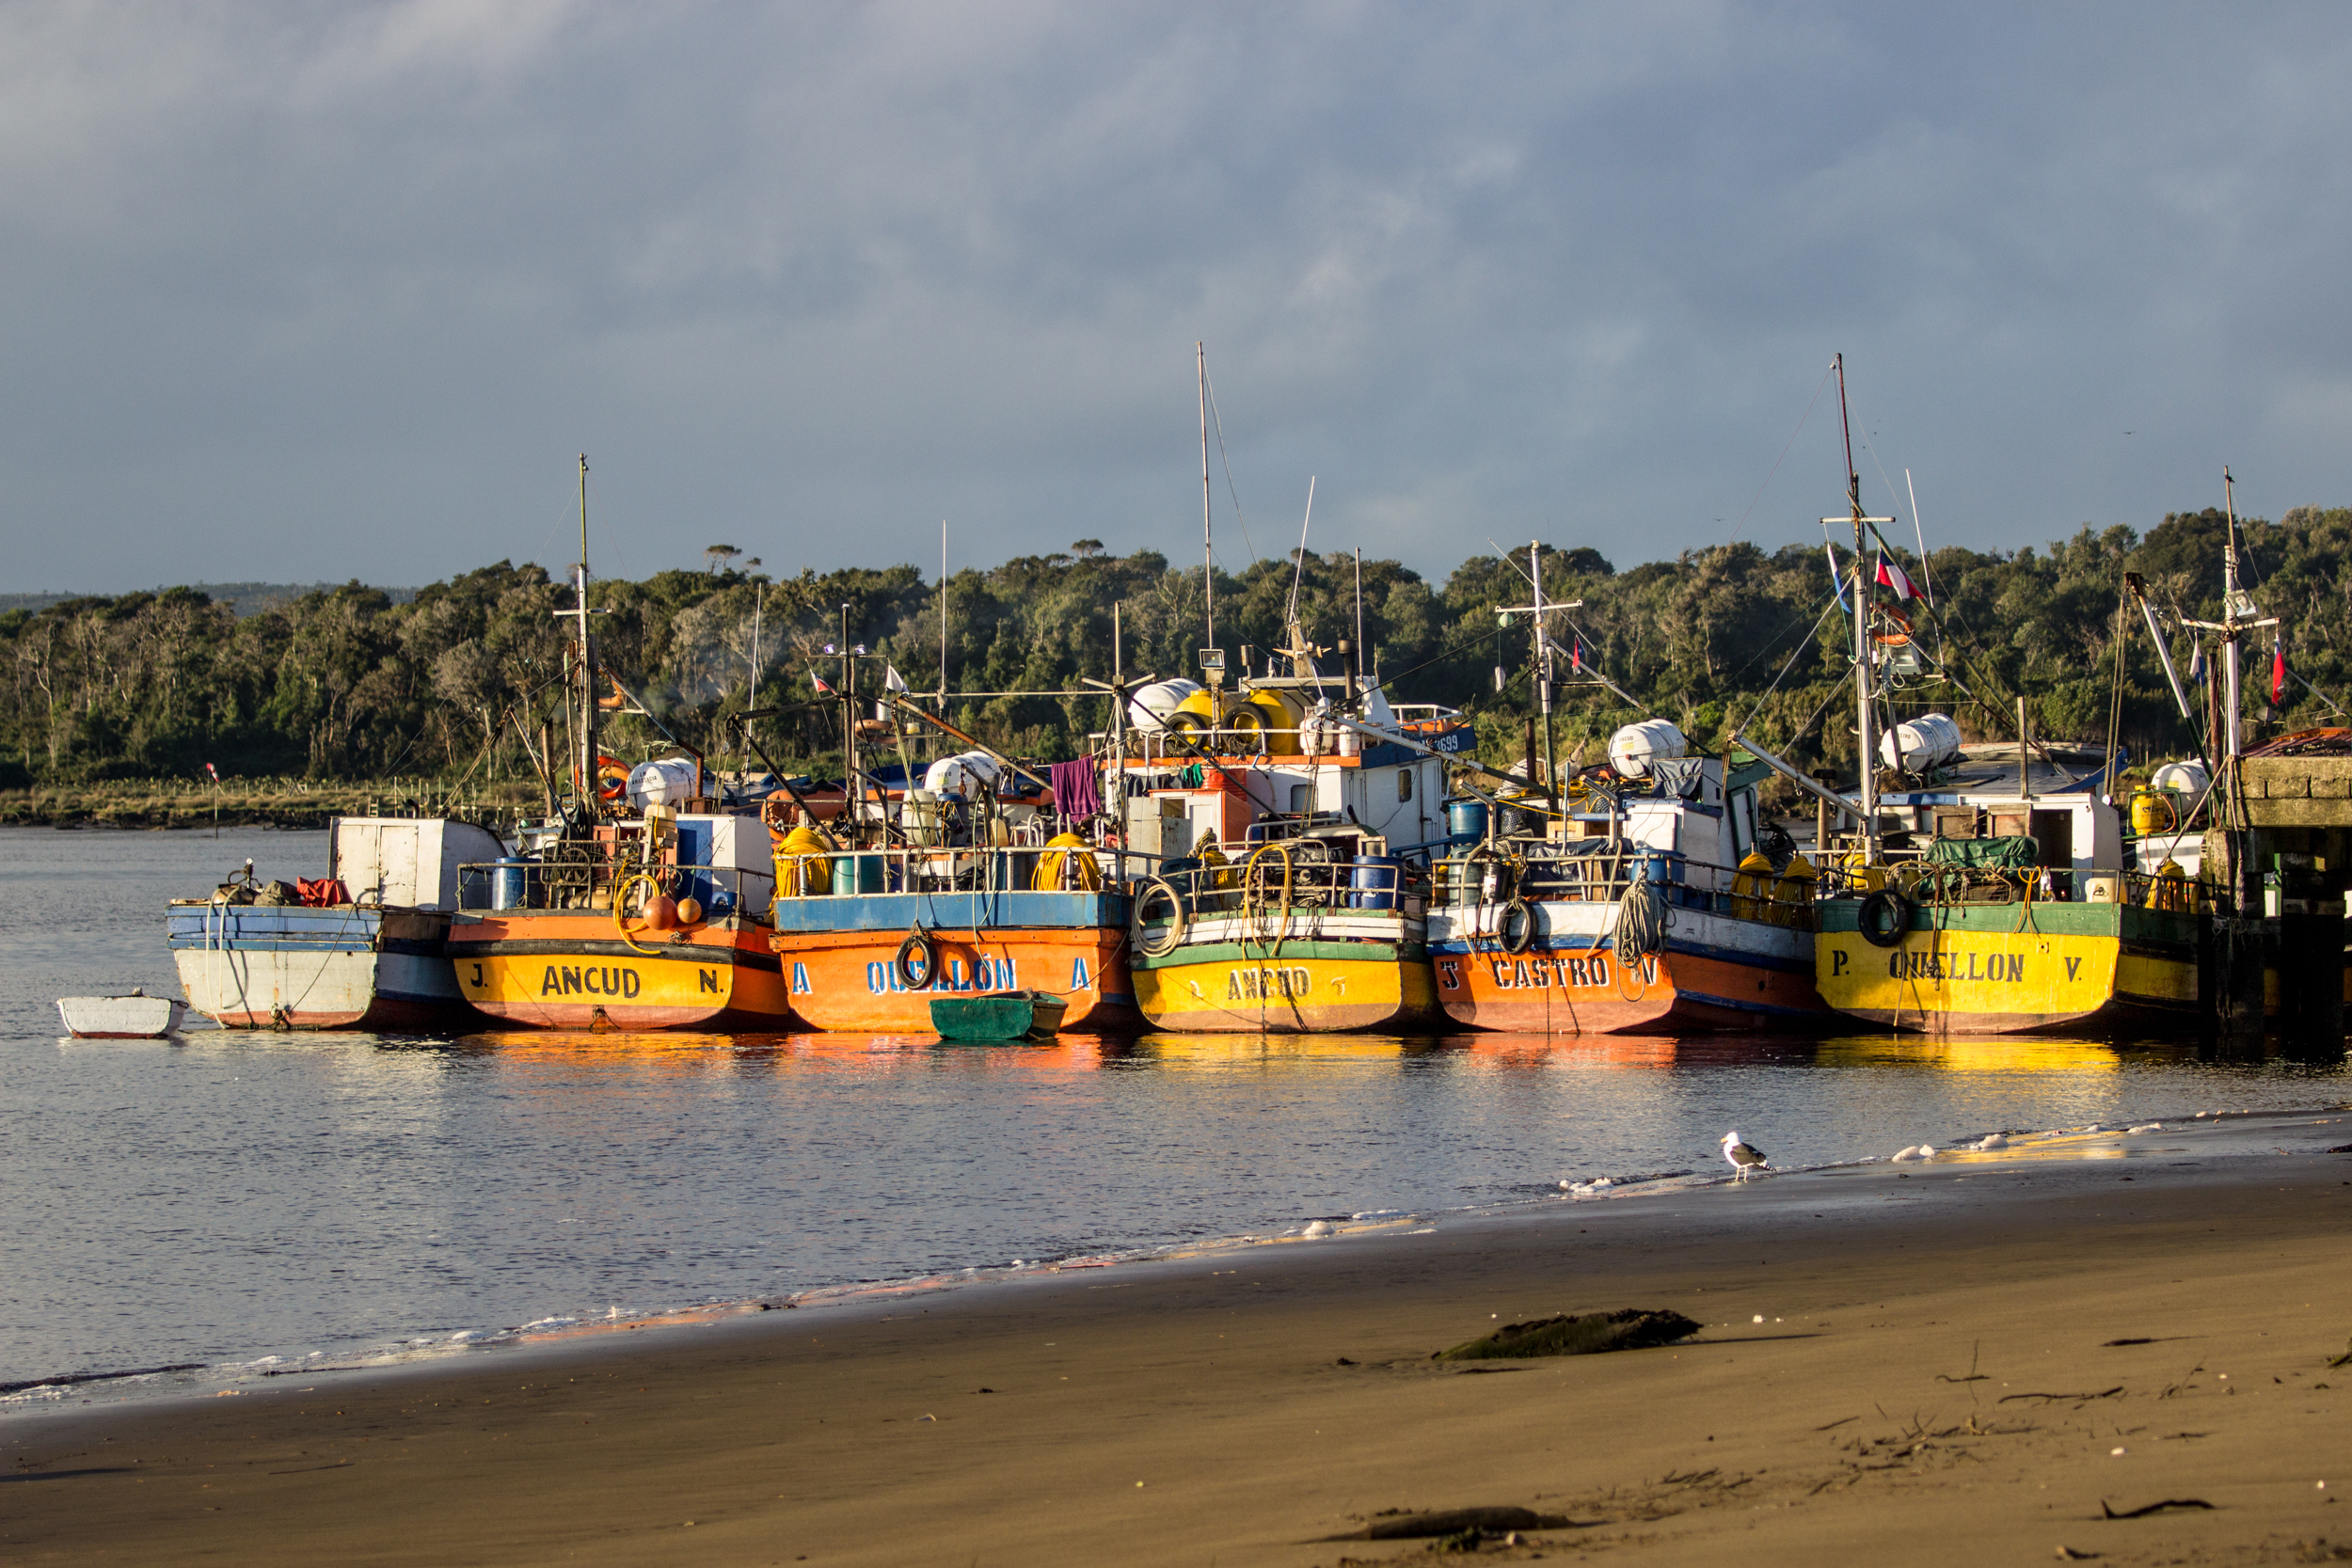 The typical boats from Chiloé. Inío is a village of fishermen.